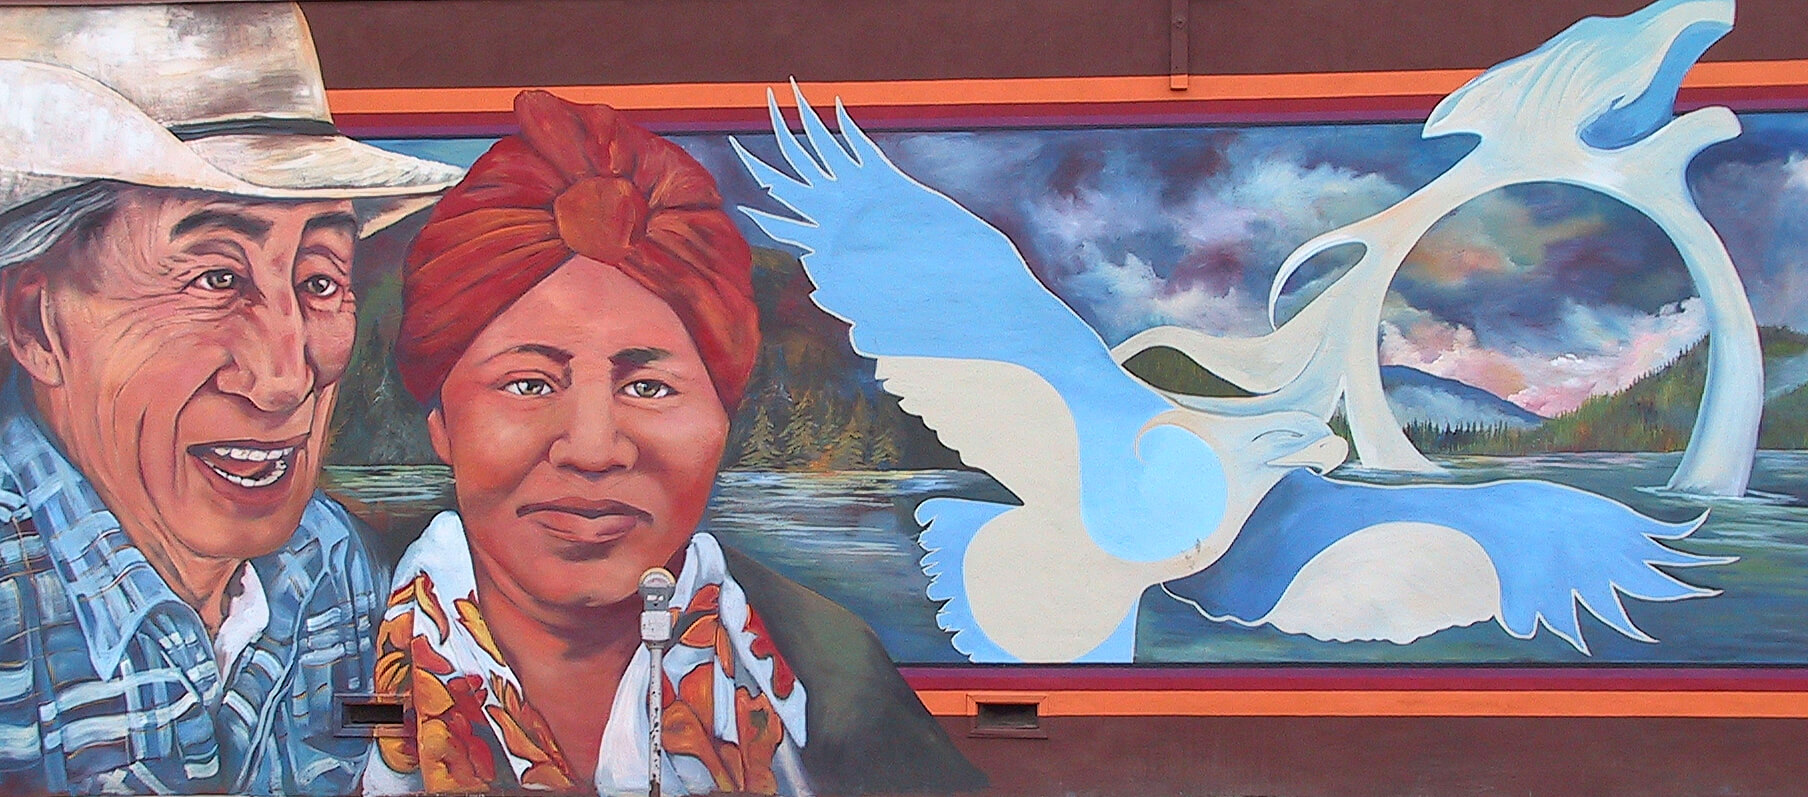 Vernon's Okanagan Indian Band Mural. An older indigenous man with gray hair wearing a cowboy hat is located on the left of the image. He is smiling and wearing a blue plaid shirt. Next to him is a woman, smiling slightly, and wearing an orange head scarf, and a white and orange scarf around her neck. To her right is a blue stylized eagle, wolf, and sea serpent design. The background shows a blue, multicoloured lake, with green forests and blue mountains in the background. The blue-black sky is doted with pink clouds. 